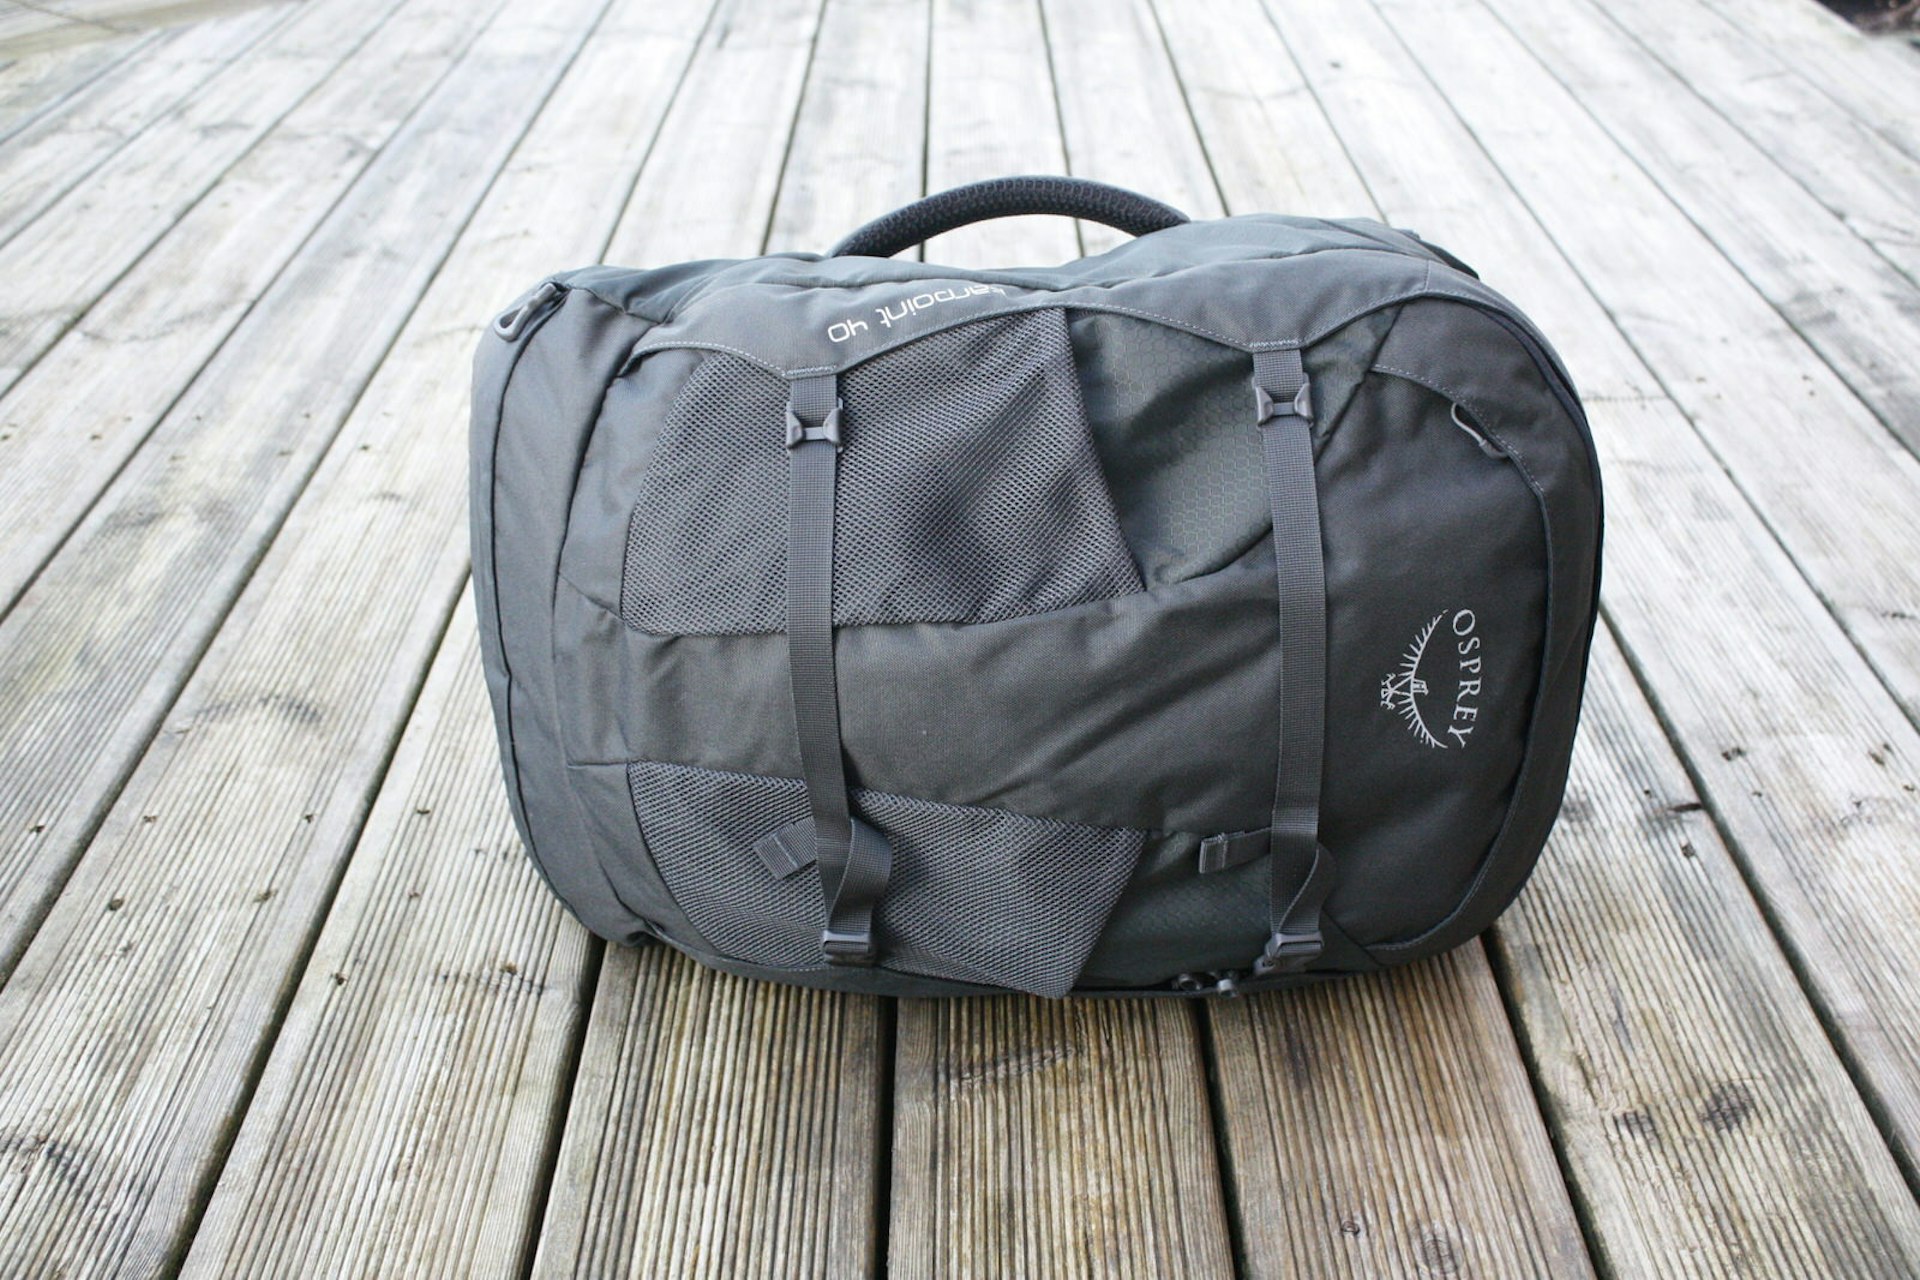 The Osprey Farpoint 40 – three bags in one for all types of travel © David Else / Lonely Planet